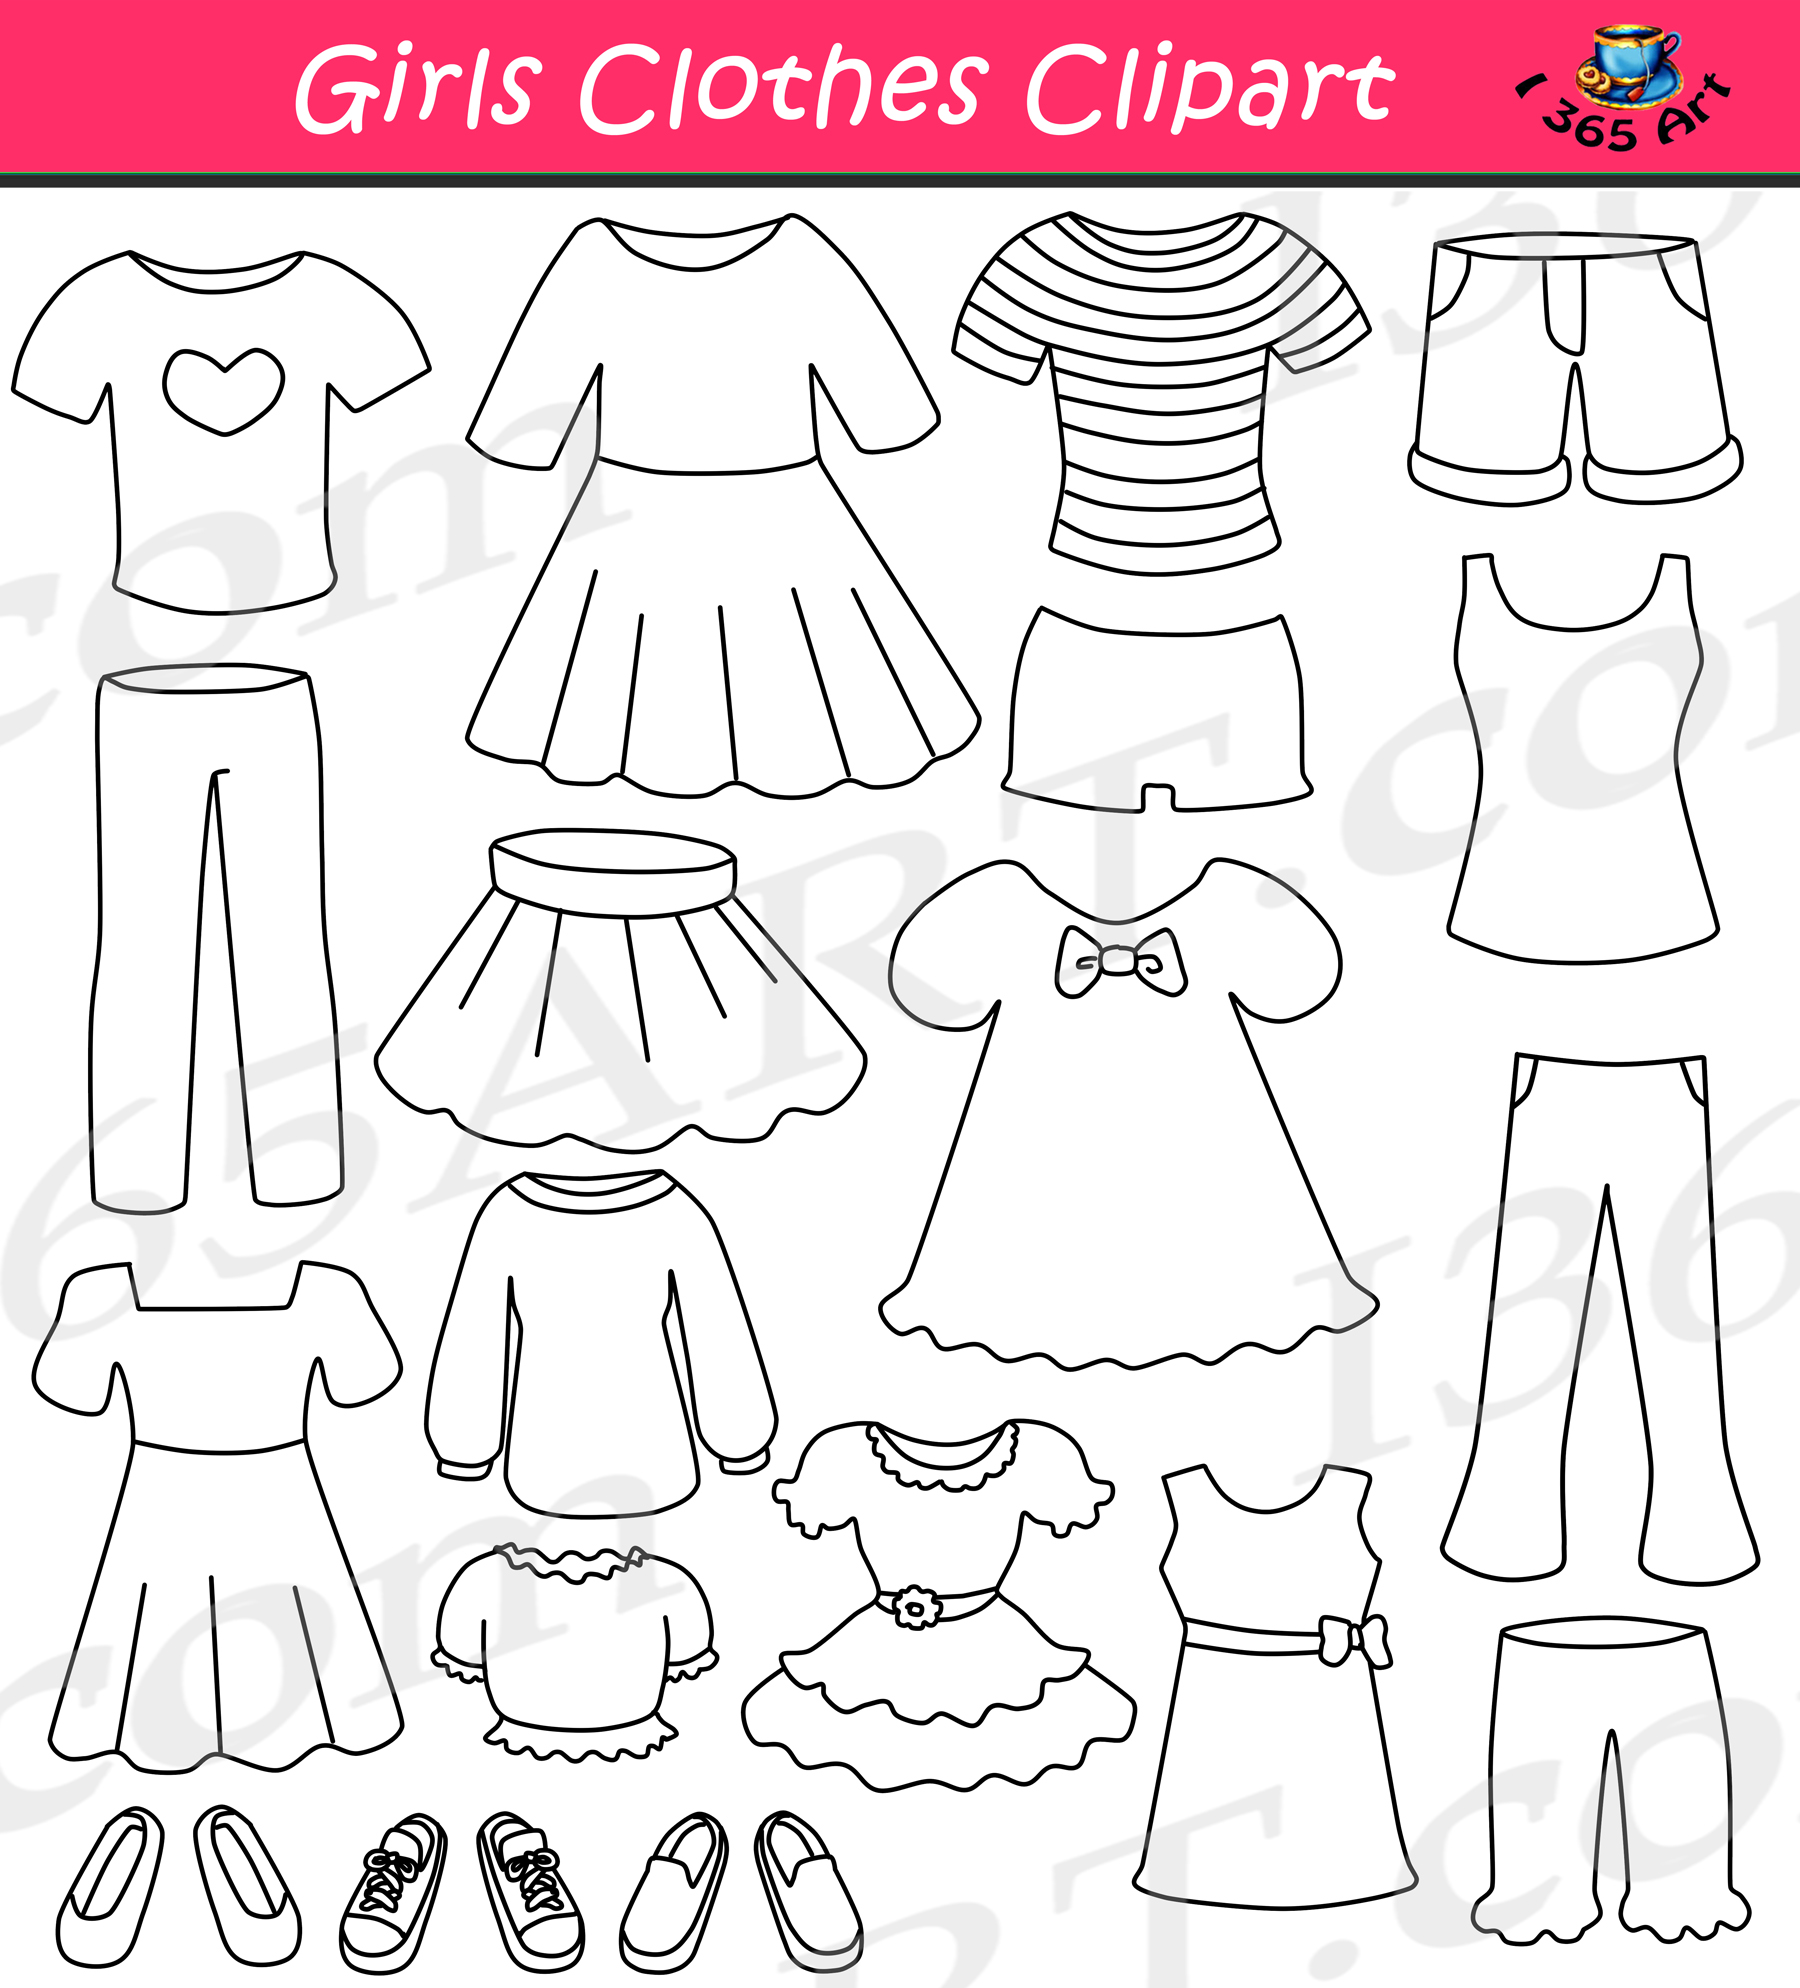 laundry clip art black and white